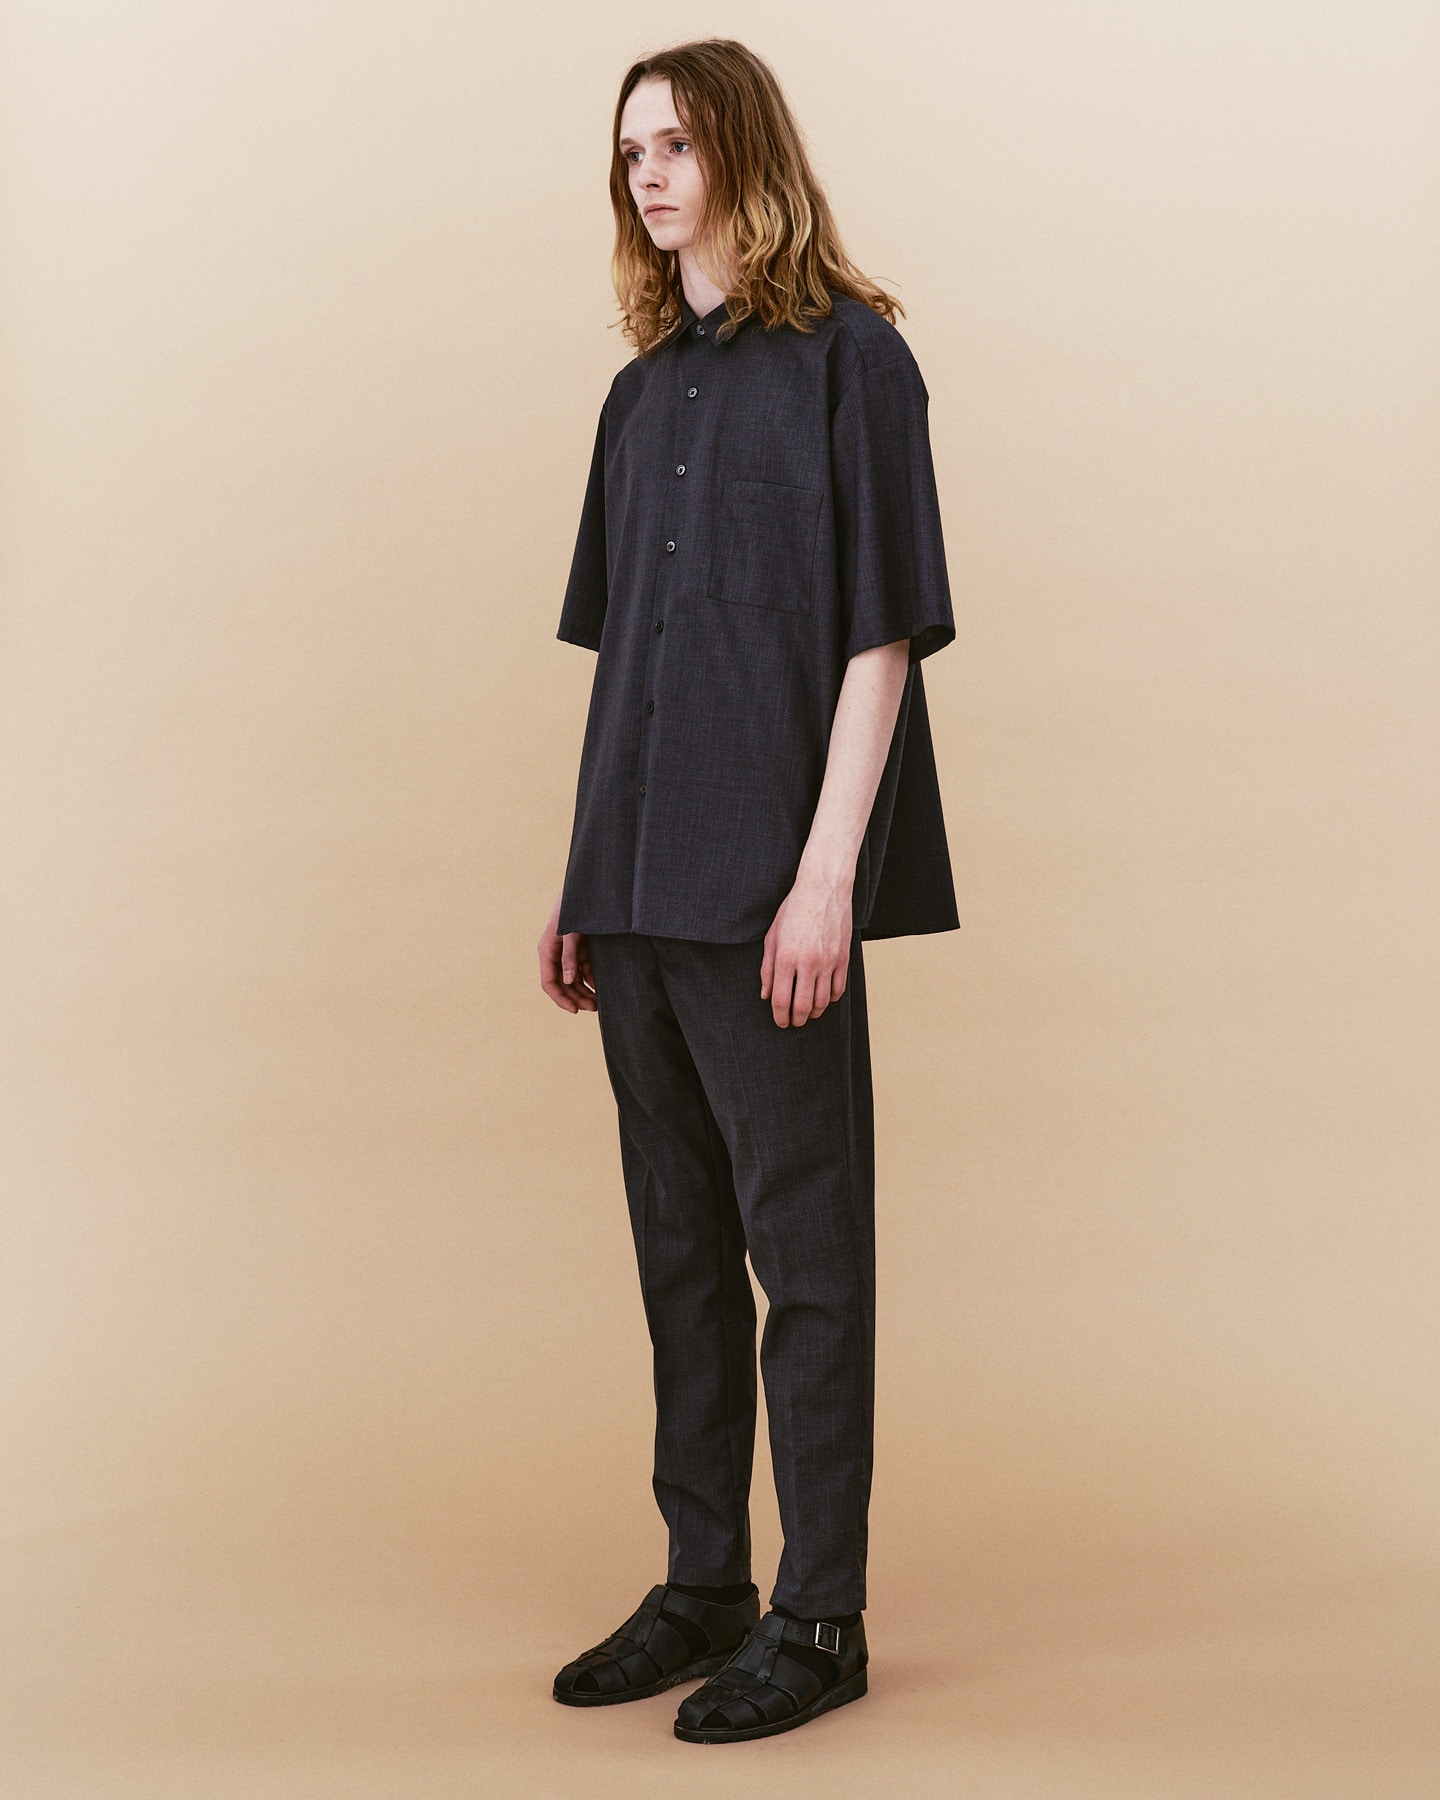 SOPH. | SUMMER STRETCH WOOL S/S BAGGY SHIRT(L CHARCOAL GRAY):